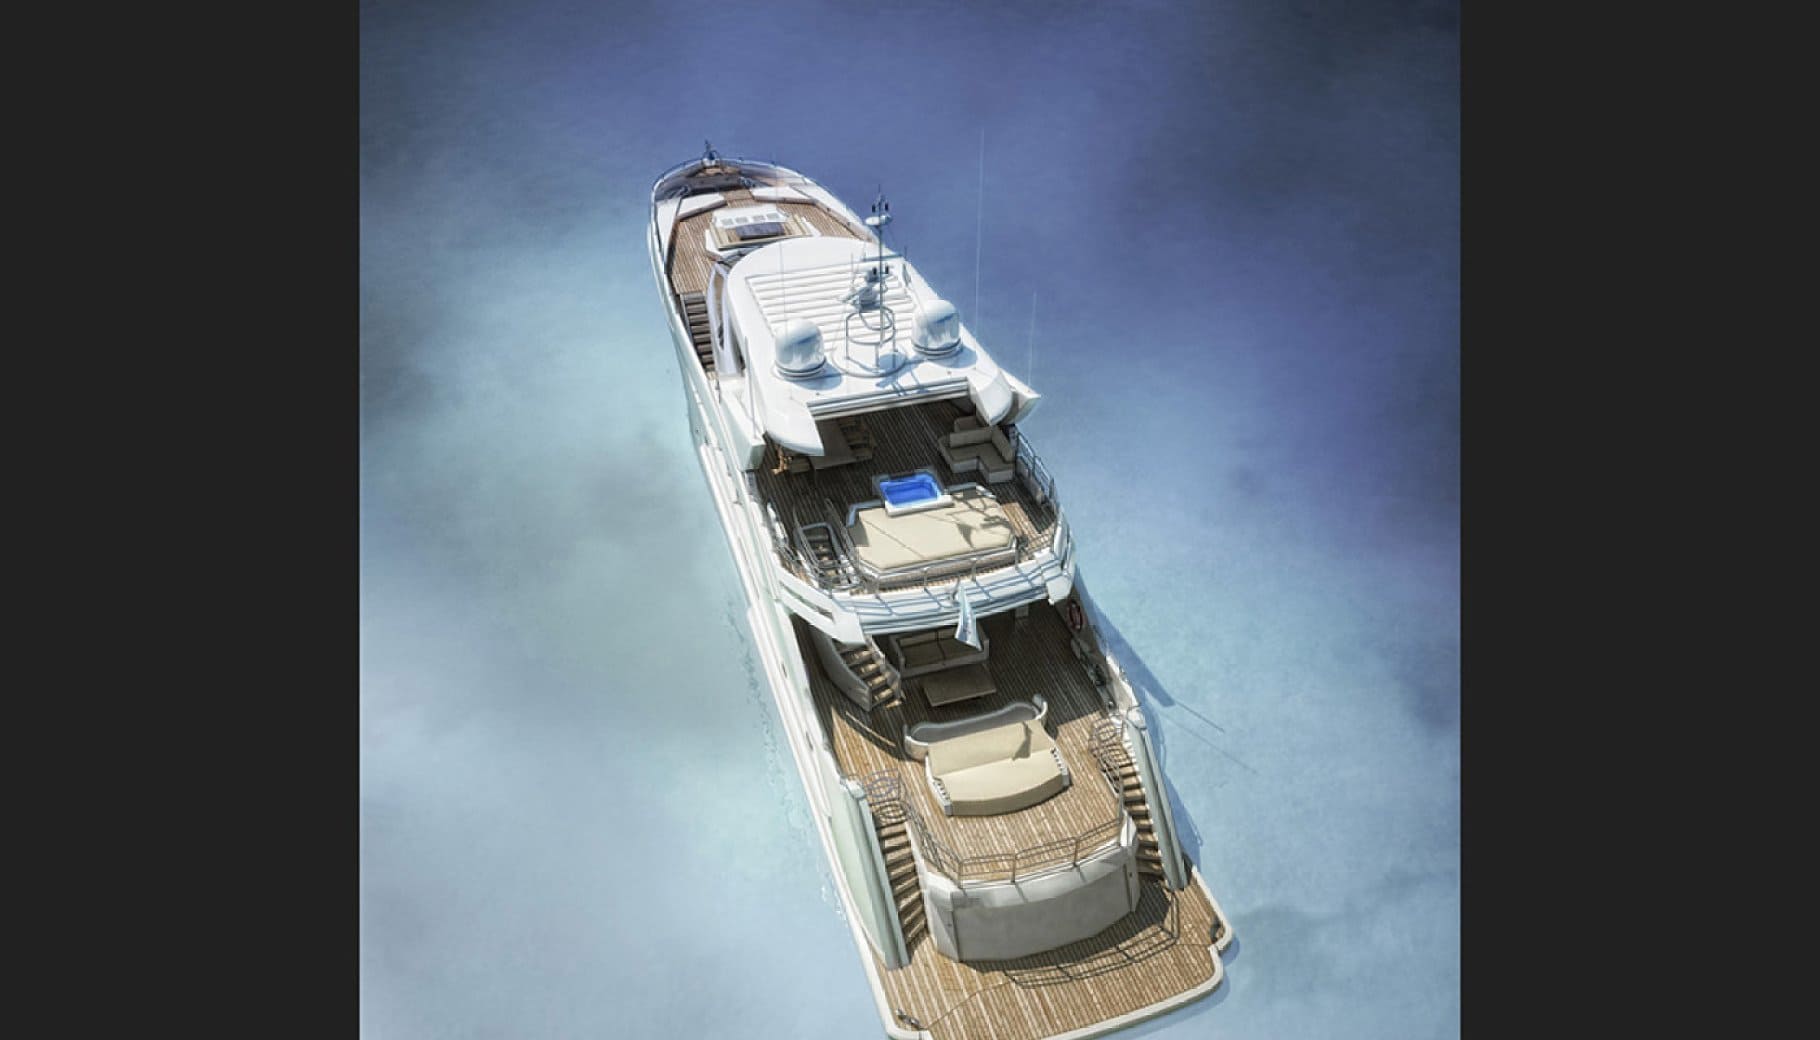 Top view of White Superyacht Sunseeker predator 130 in the bay.